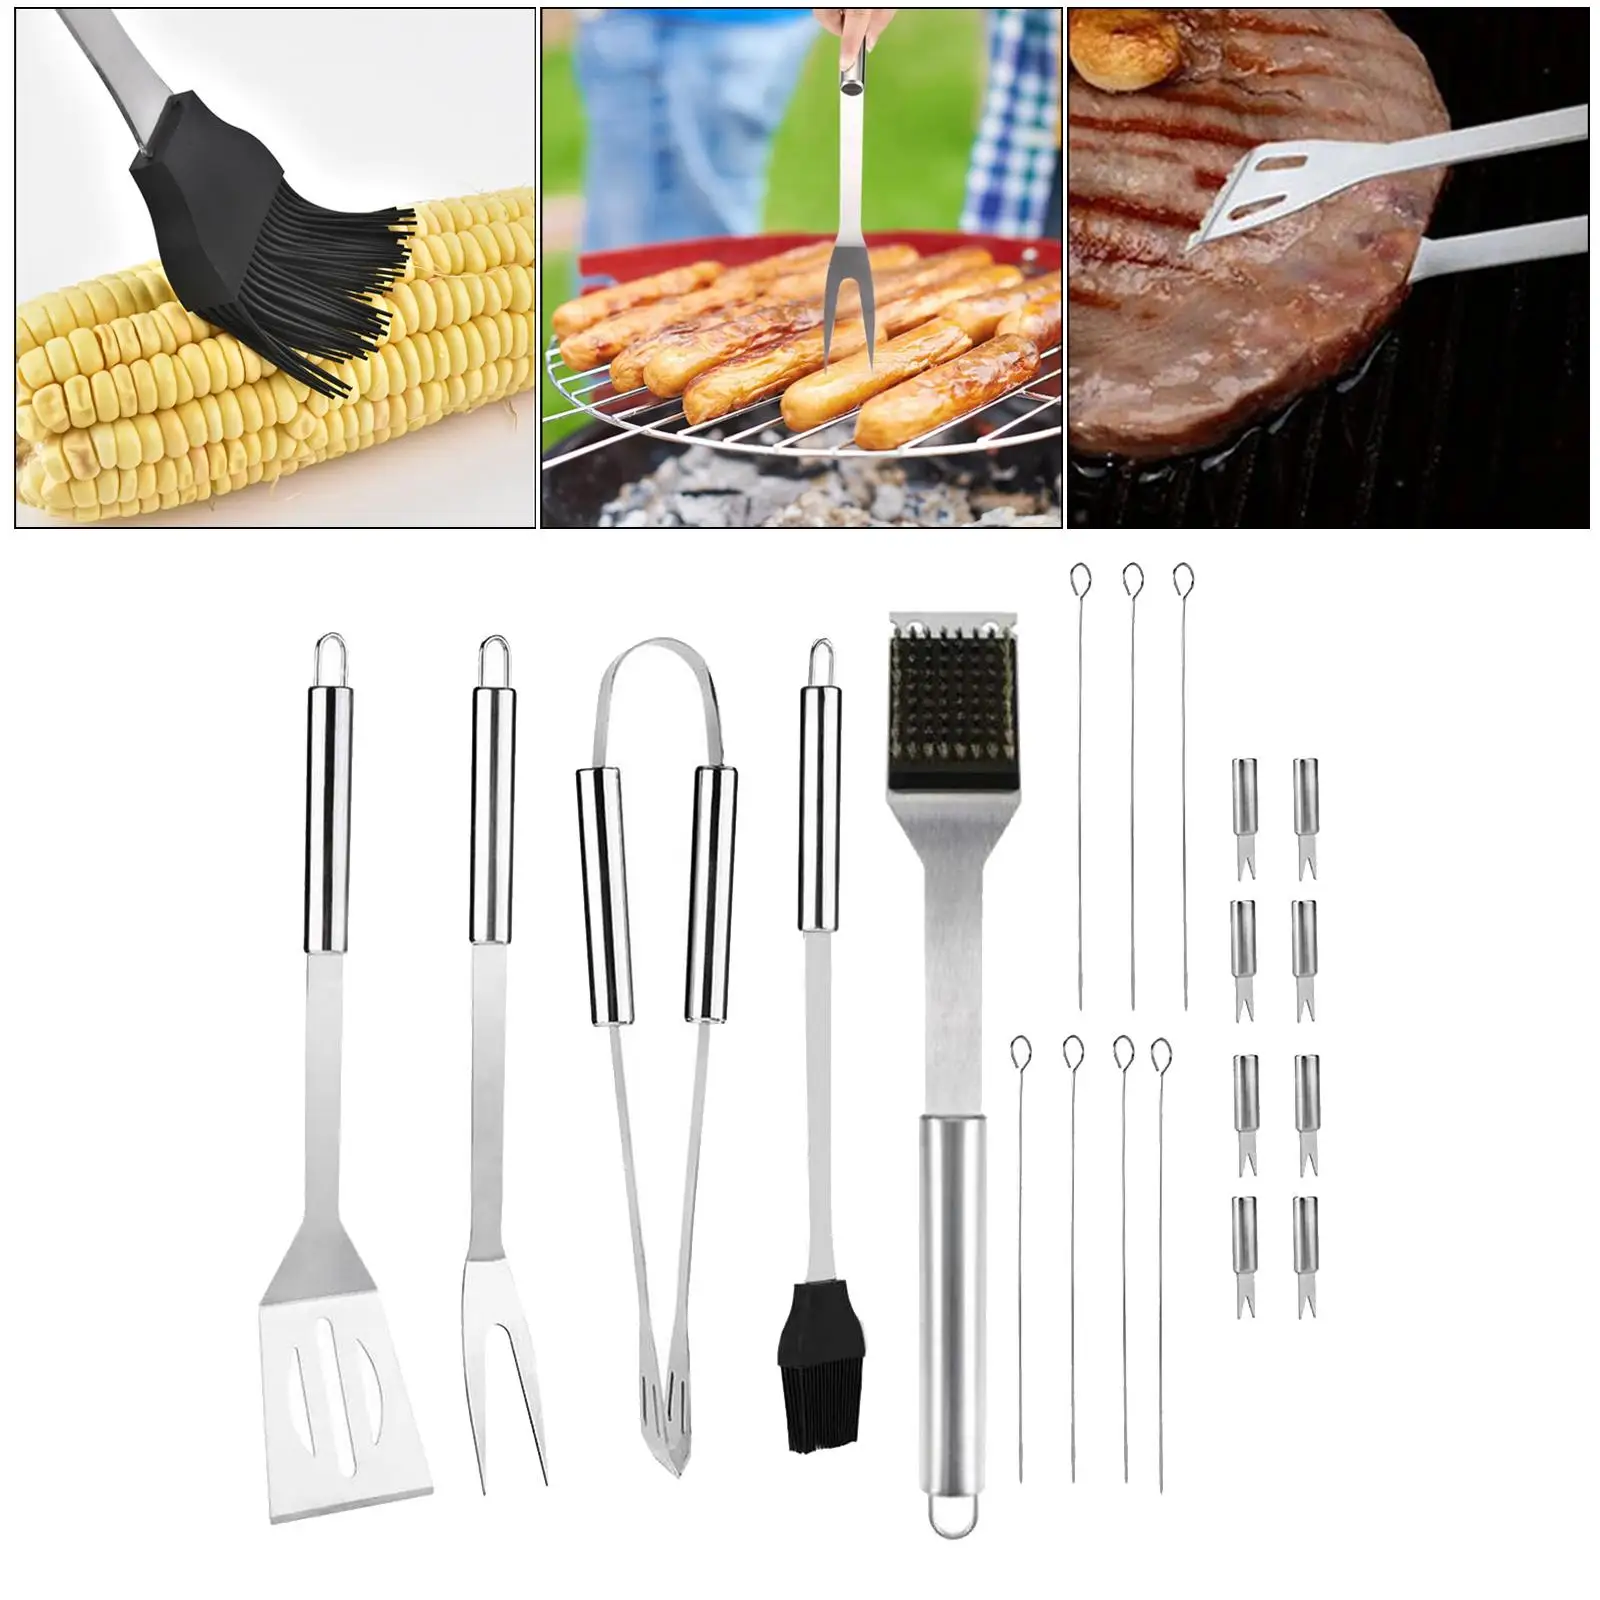  Tool  Fork Skewers Barbecue Grilling in Portable Bag